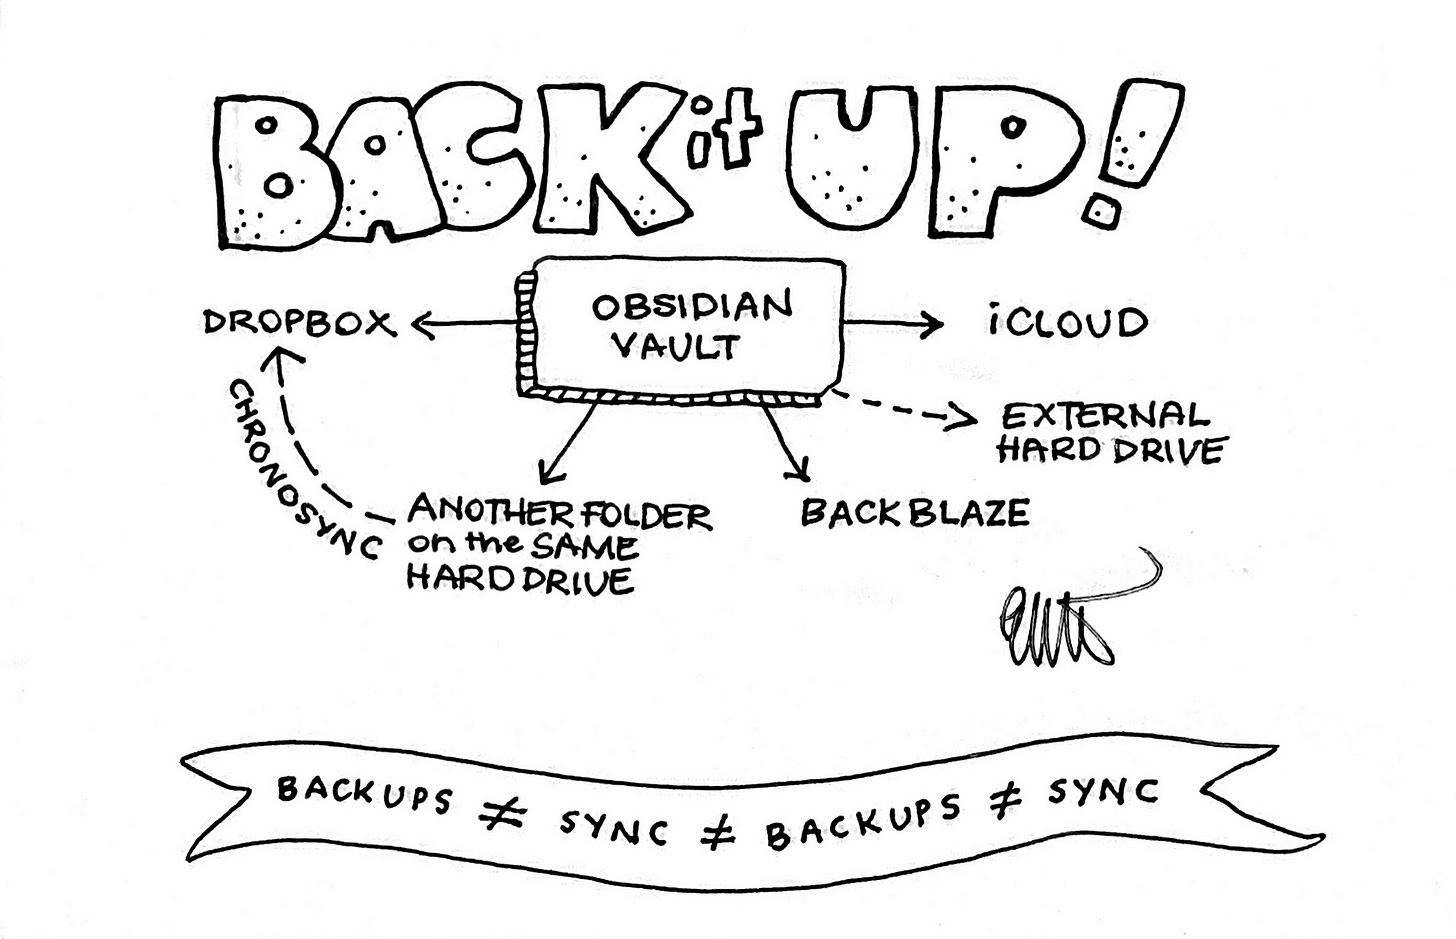 Hand drawn diagram in black ink on a white background. The words BACK it UP! are in large block letters across the top. Centred under the heading is a rectangle containing the words, OBSIDIAN VAULT. There are five arrows coming out of this rectangle, pointing in different directions. The arrows are labelled Dropbox (an arrow called ChronoSync joins this label to), Another folder on the same hard drive, BackBlaze, iCloud, and External hard drive.